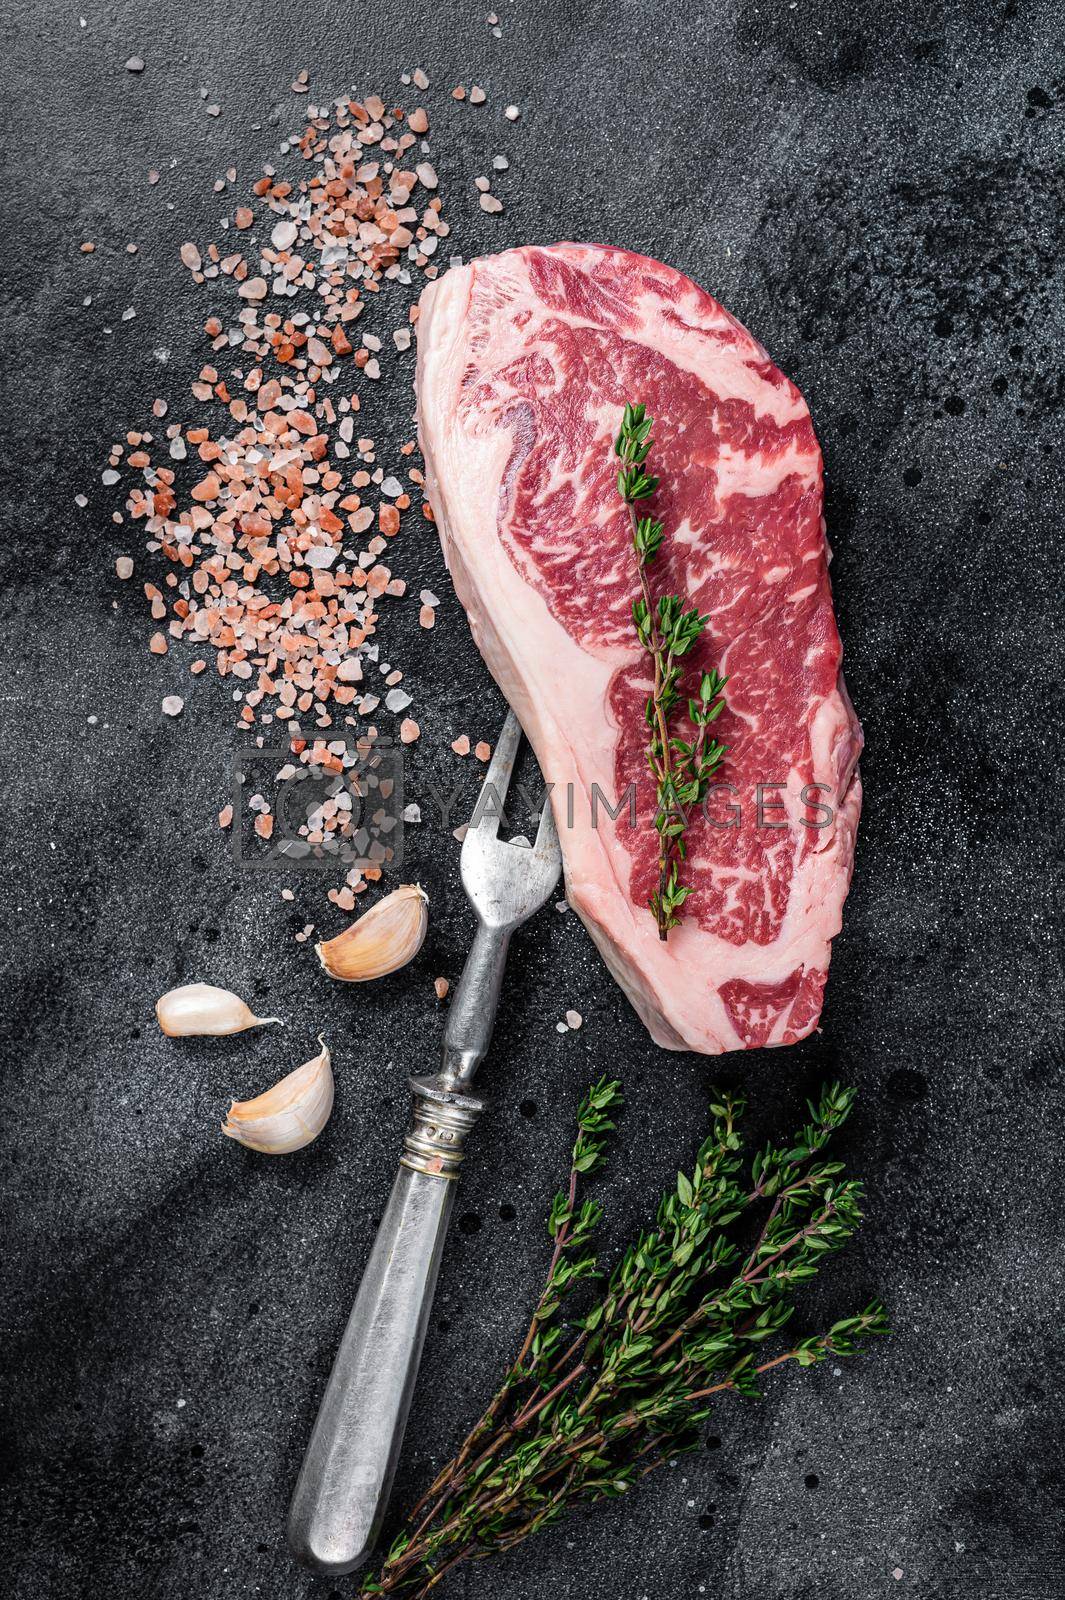 Royalty free image of Raw striploin steak on a butcher table with salt and thyme. Black background. Top view by Composter